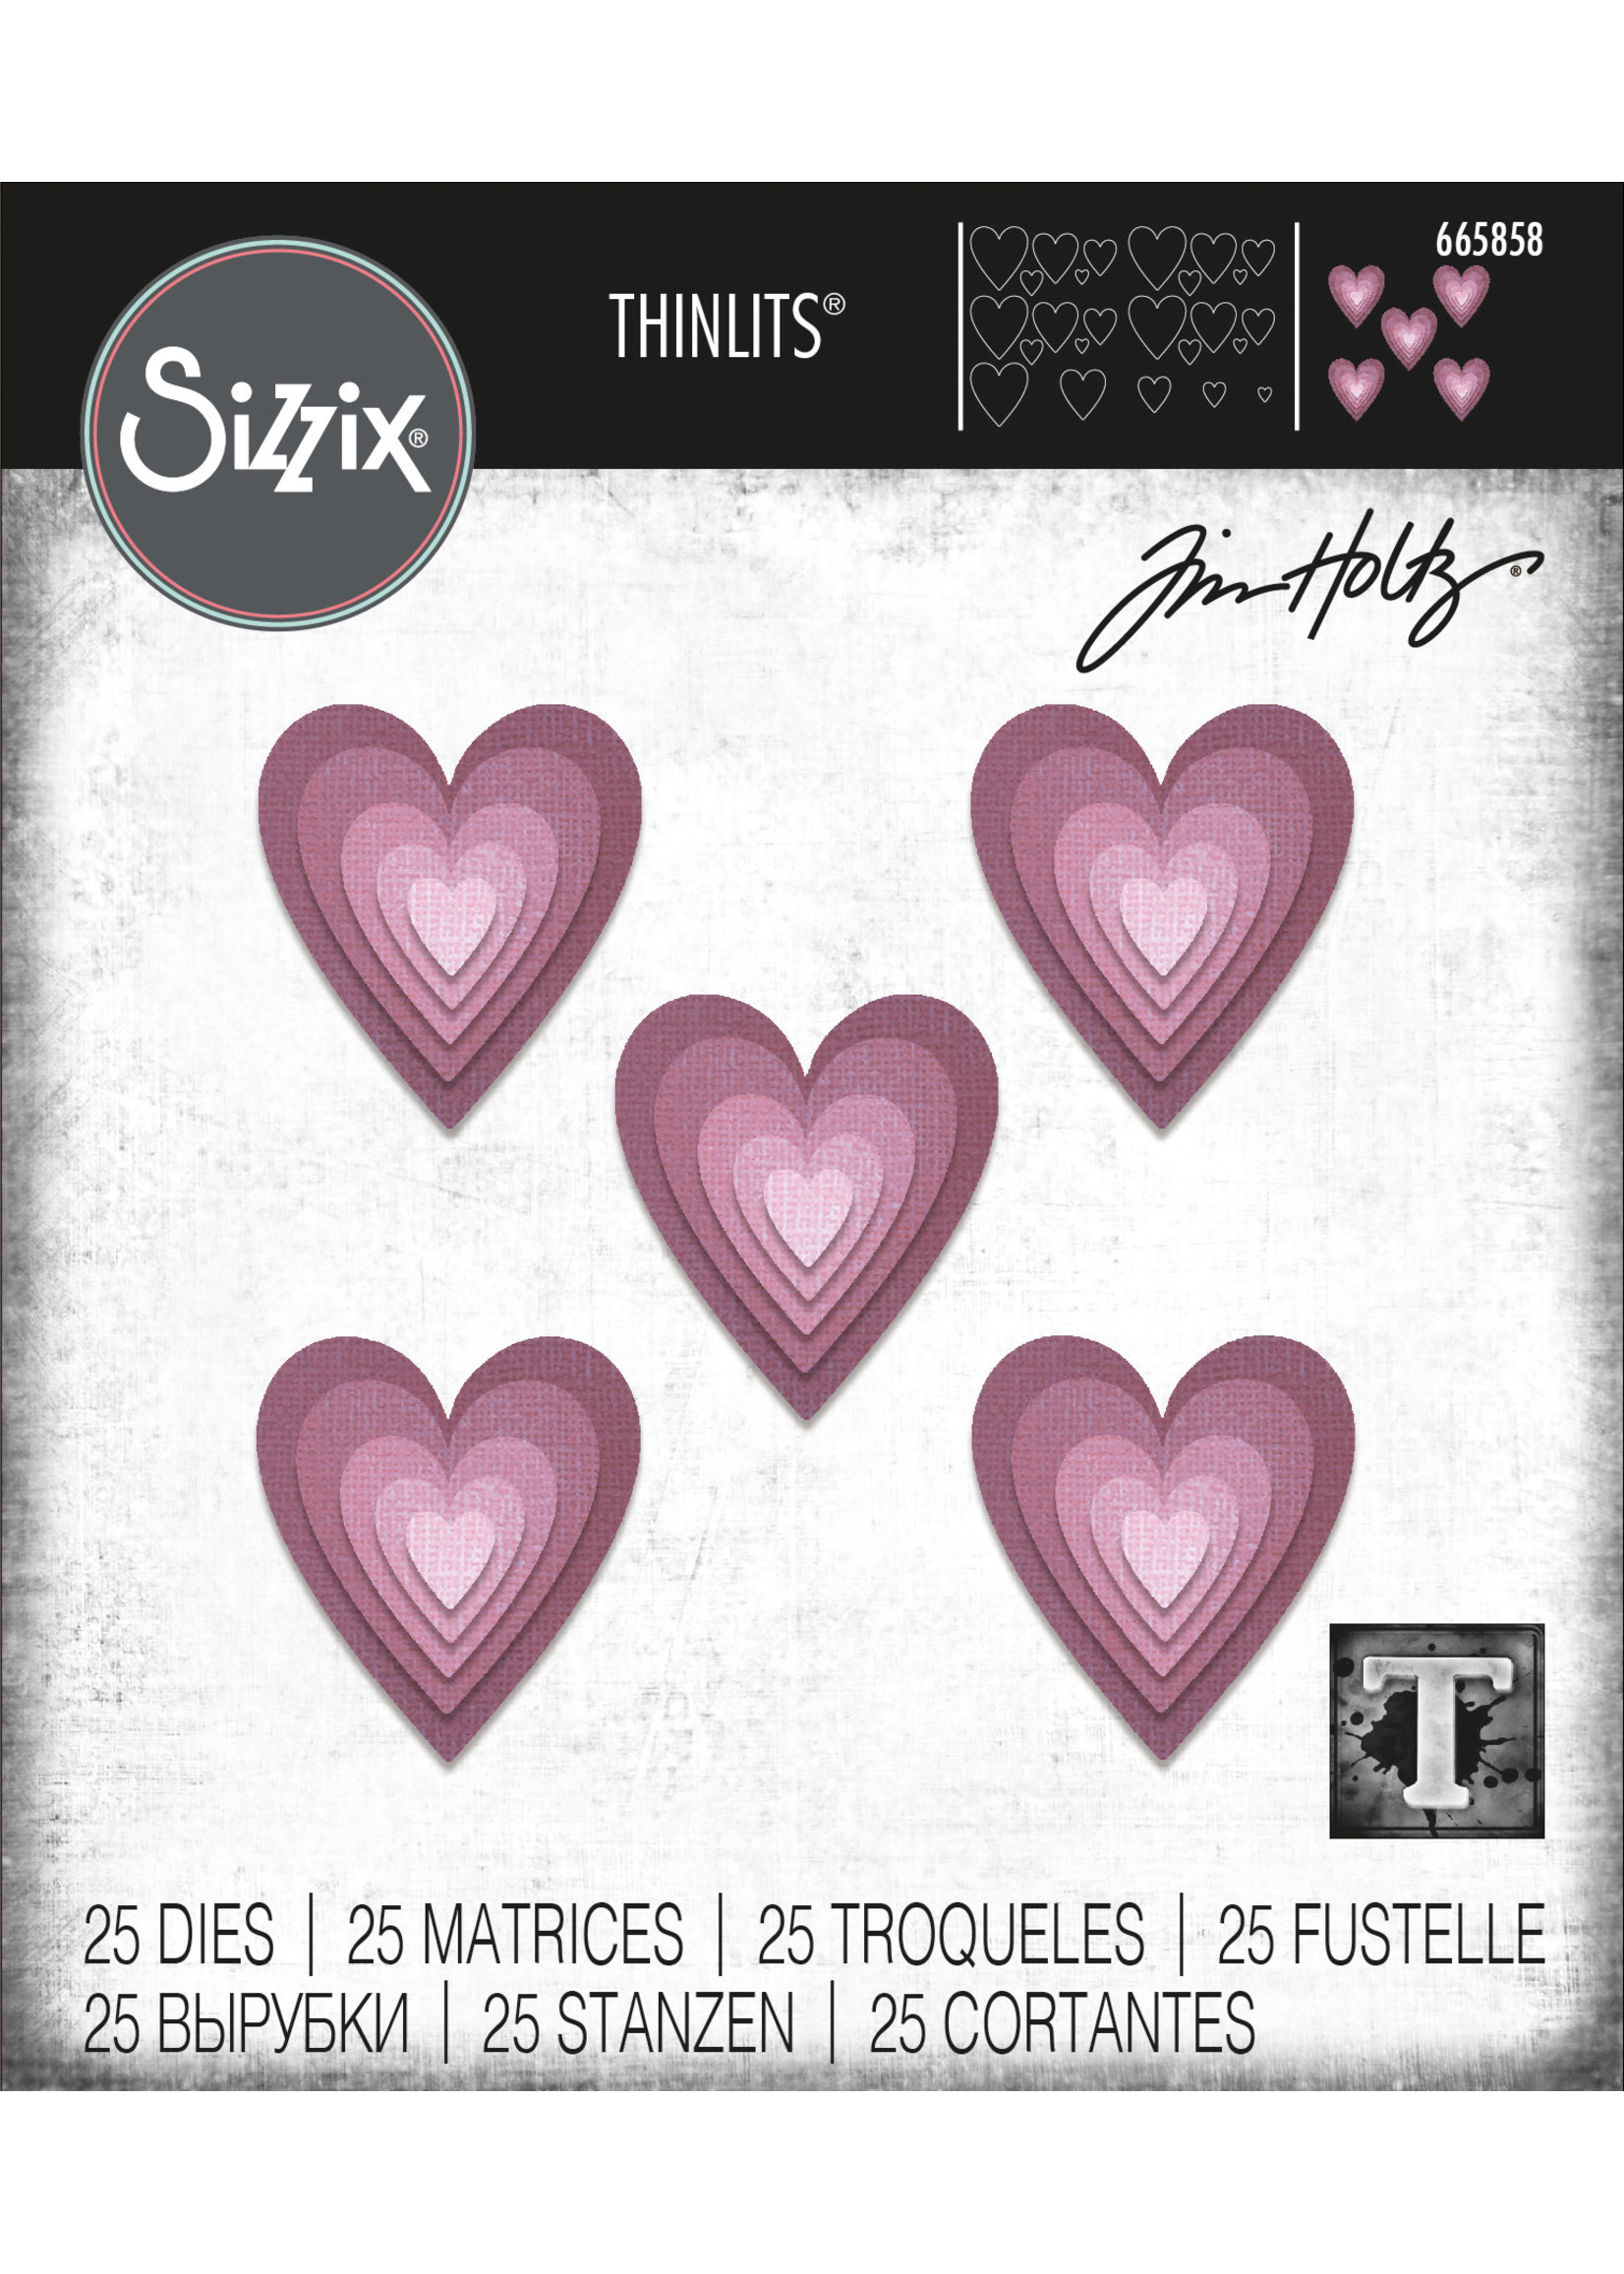 Sizzix Stacked Tiles Die: Hearts